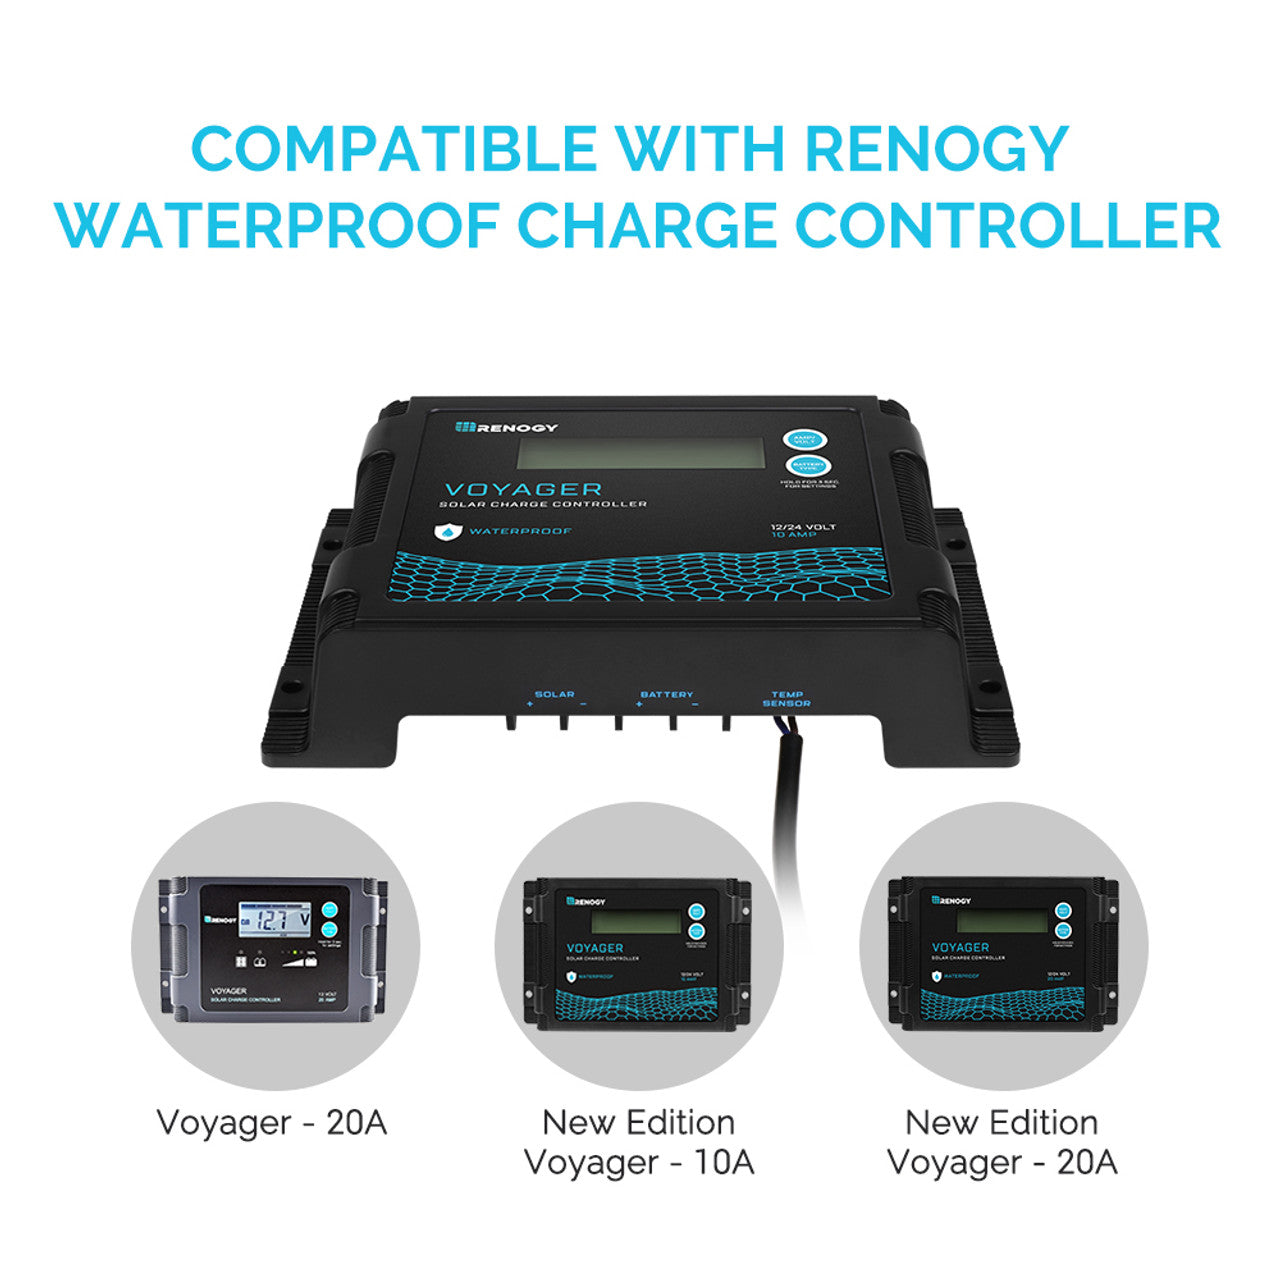 Battery Temperature Sensor for Voyager RTS Charge Controllers Perfect for Solar Systems